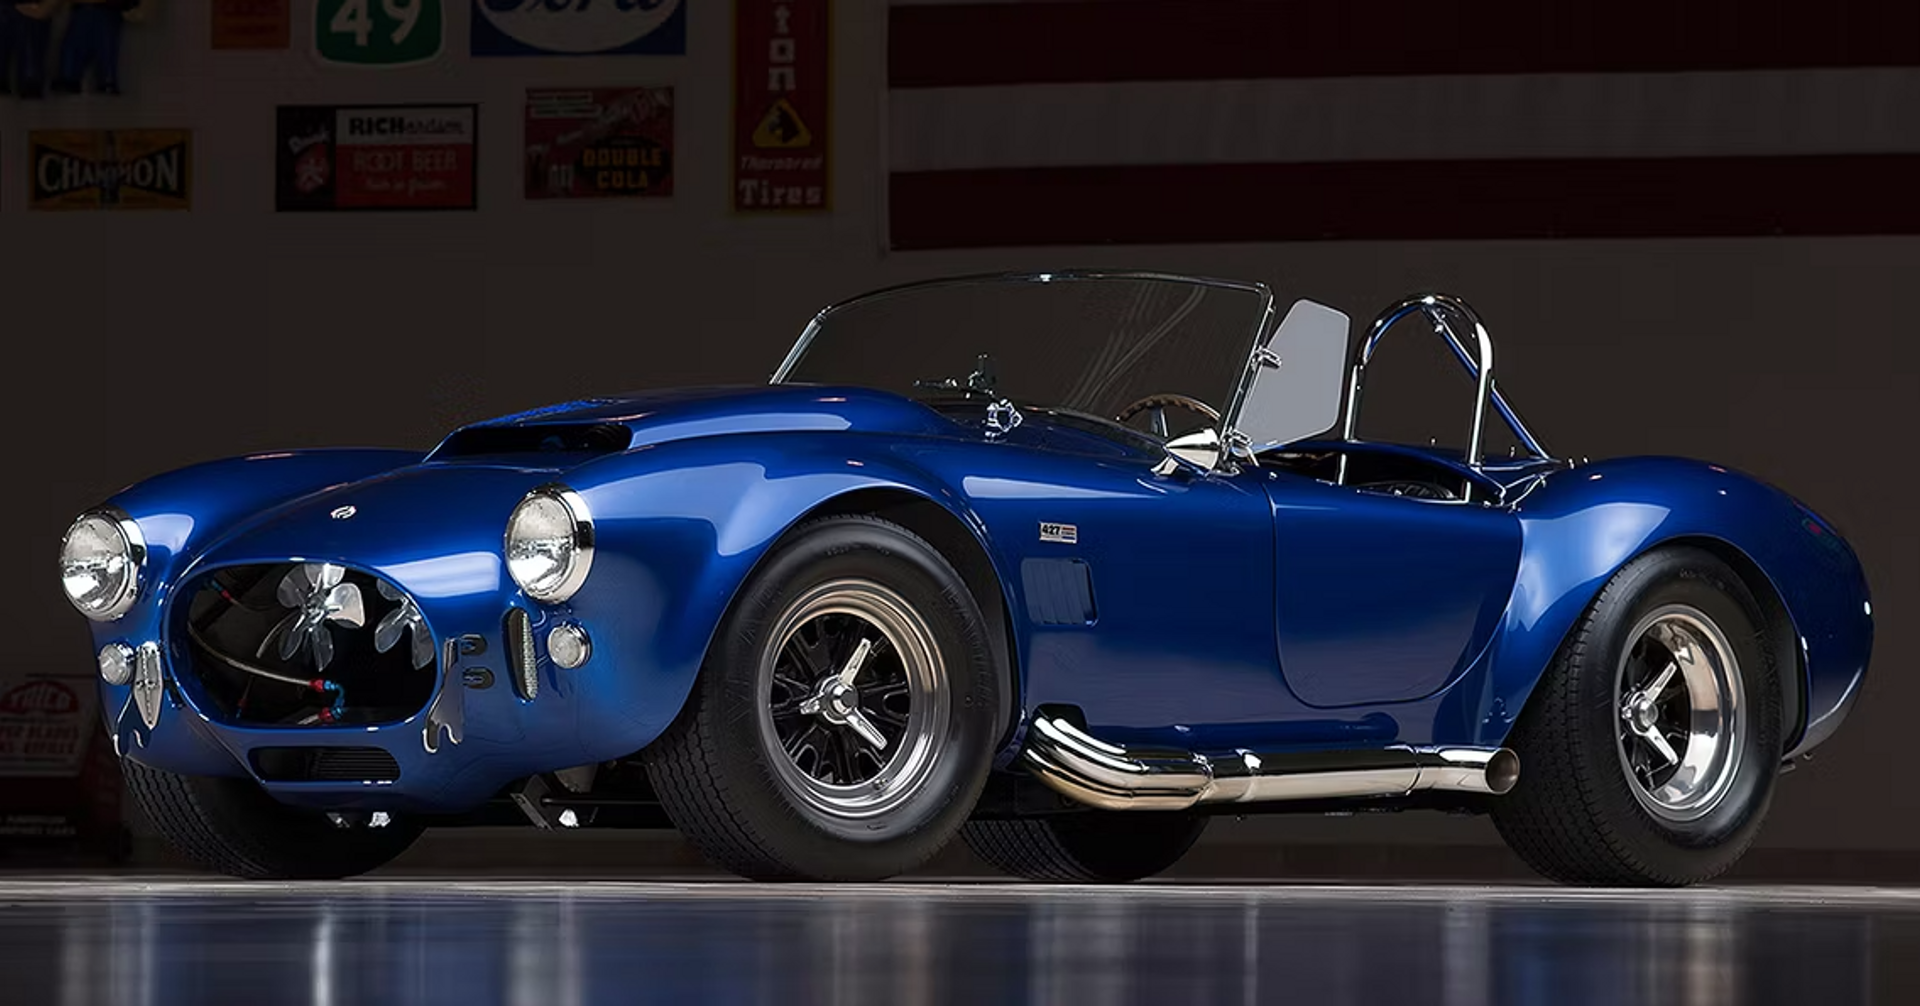 The only 1966 Shelby Cobra 427 ever. The electric blue car is pictured against a dark background.